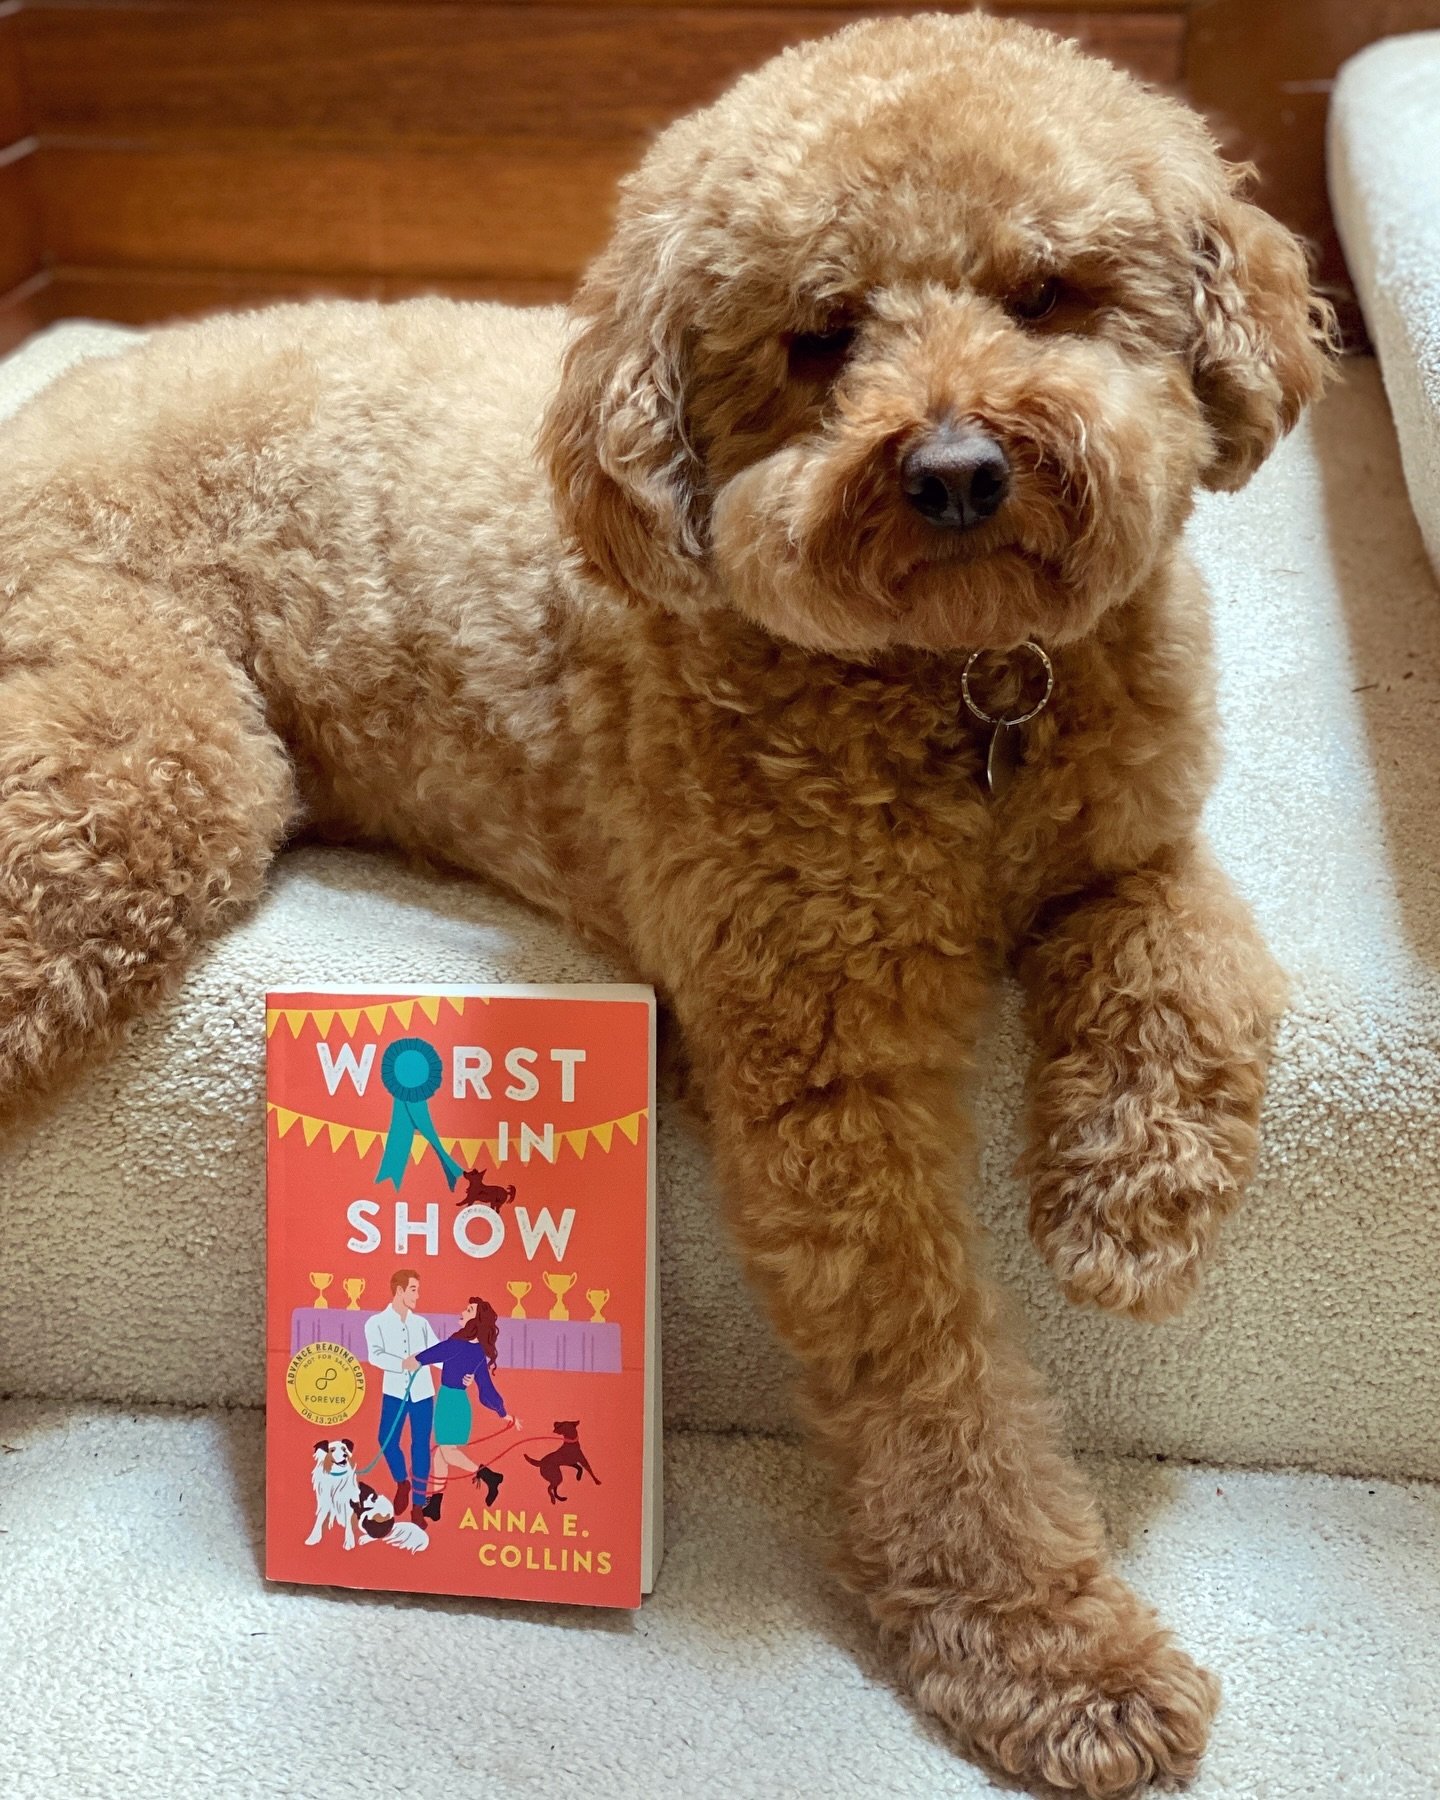 Archie is extra floofy today and begged me to let him pose with &ldquo;his&rdquo; book. I couldn&rsquo;t say no - it is dedicated to him after all. Worst in Show can be yours too - preorders are open! 😜🐾

If your dog could read, what would be the g